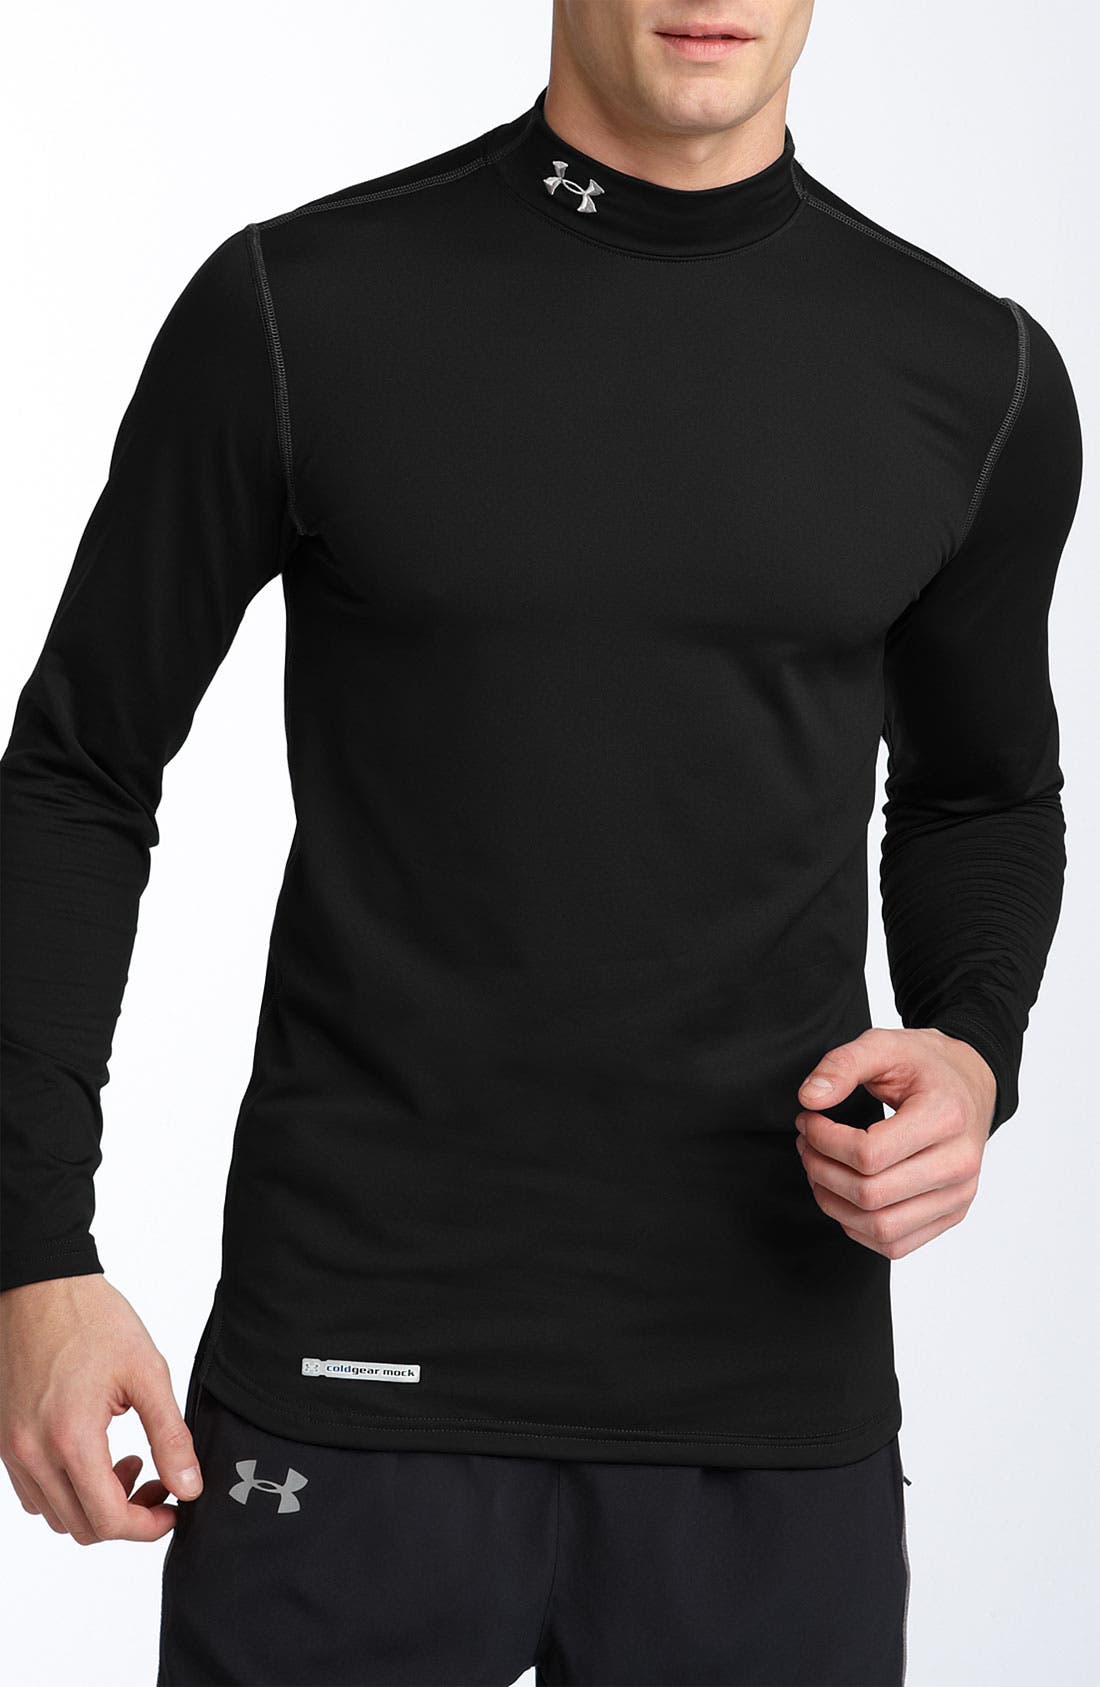 under armour coldgear fitted long sleeve